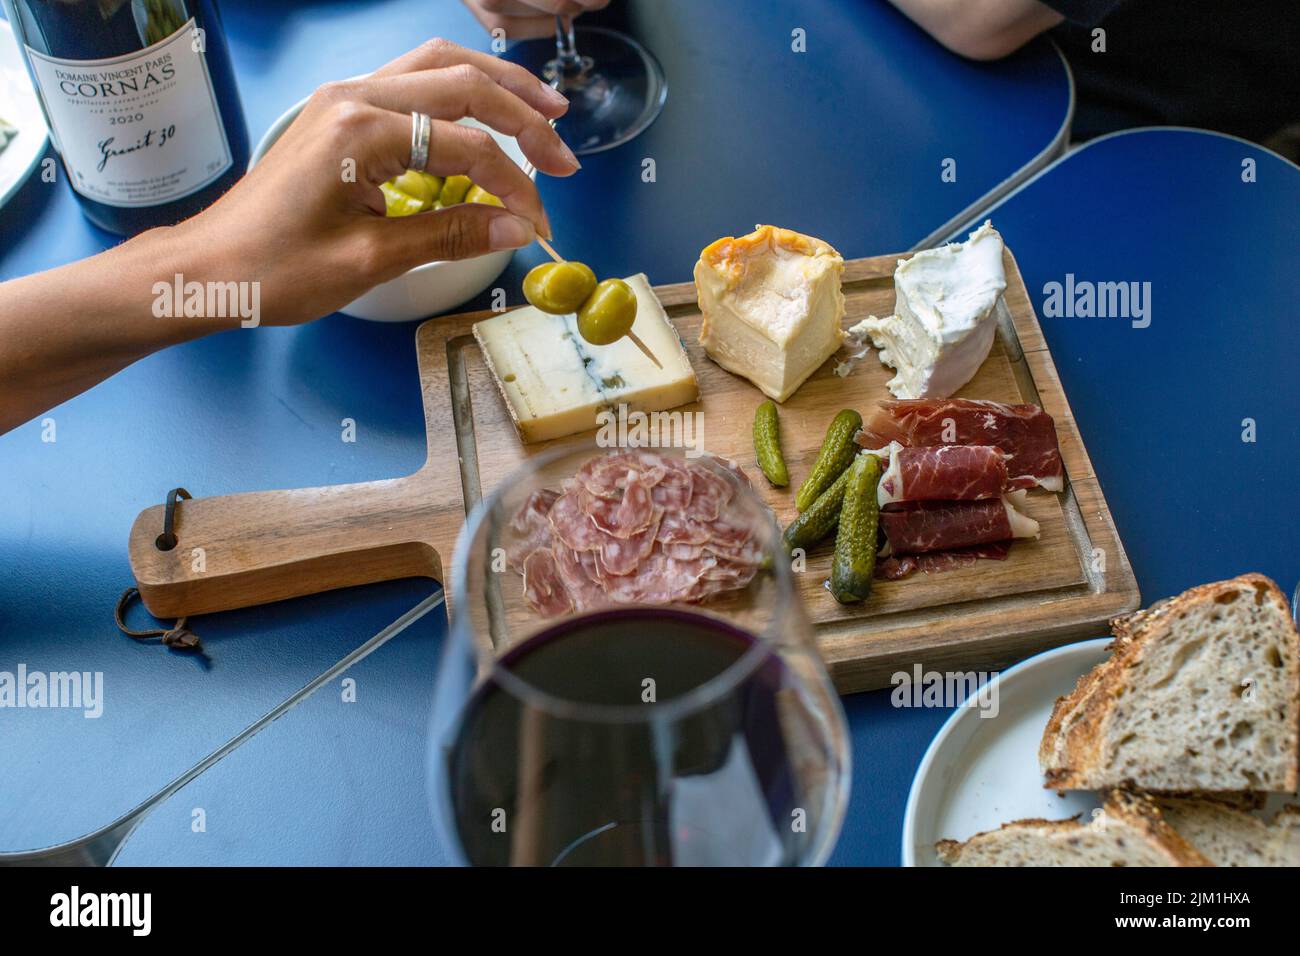 Red wine ,charcuterie and cheese board, red wine, snacks and peoples hands Stock Photo